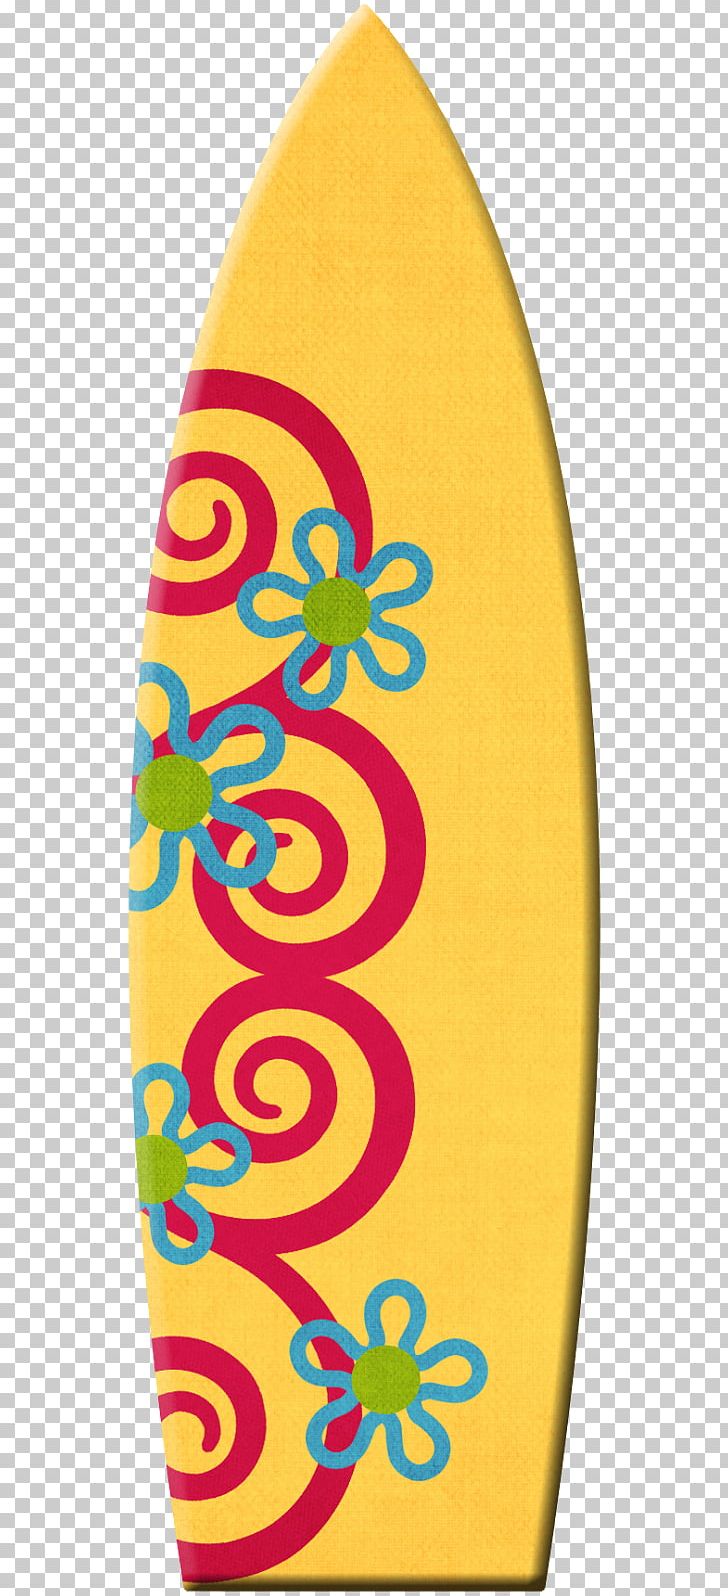 Surfboard Surfing Party Birthday Beach PNG, Clipart, Art, Beach, Birthday, Hawaii, Hawaiian Girl Free PNG Download